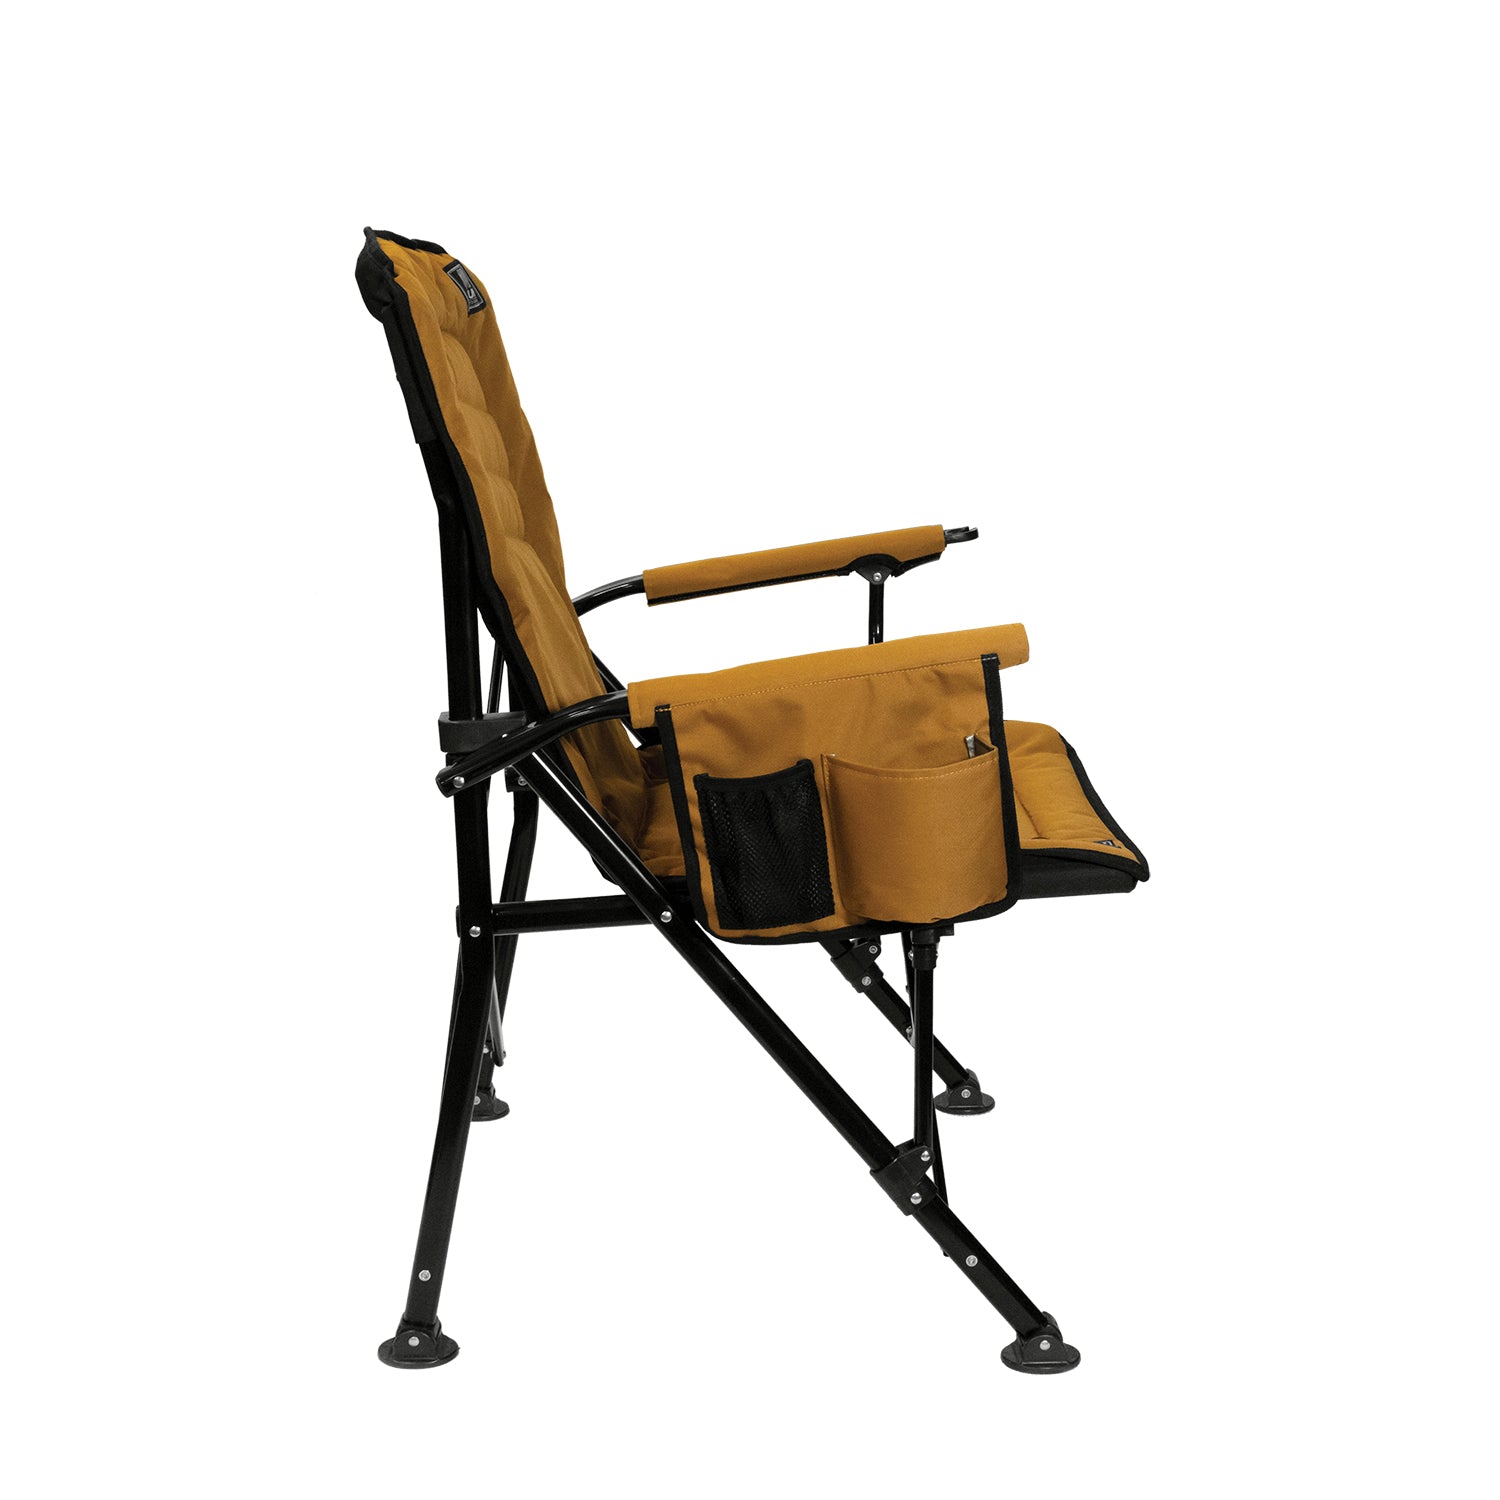 Switchback chair sideaways